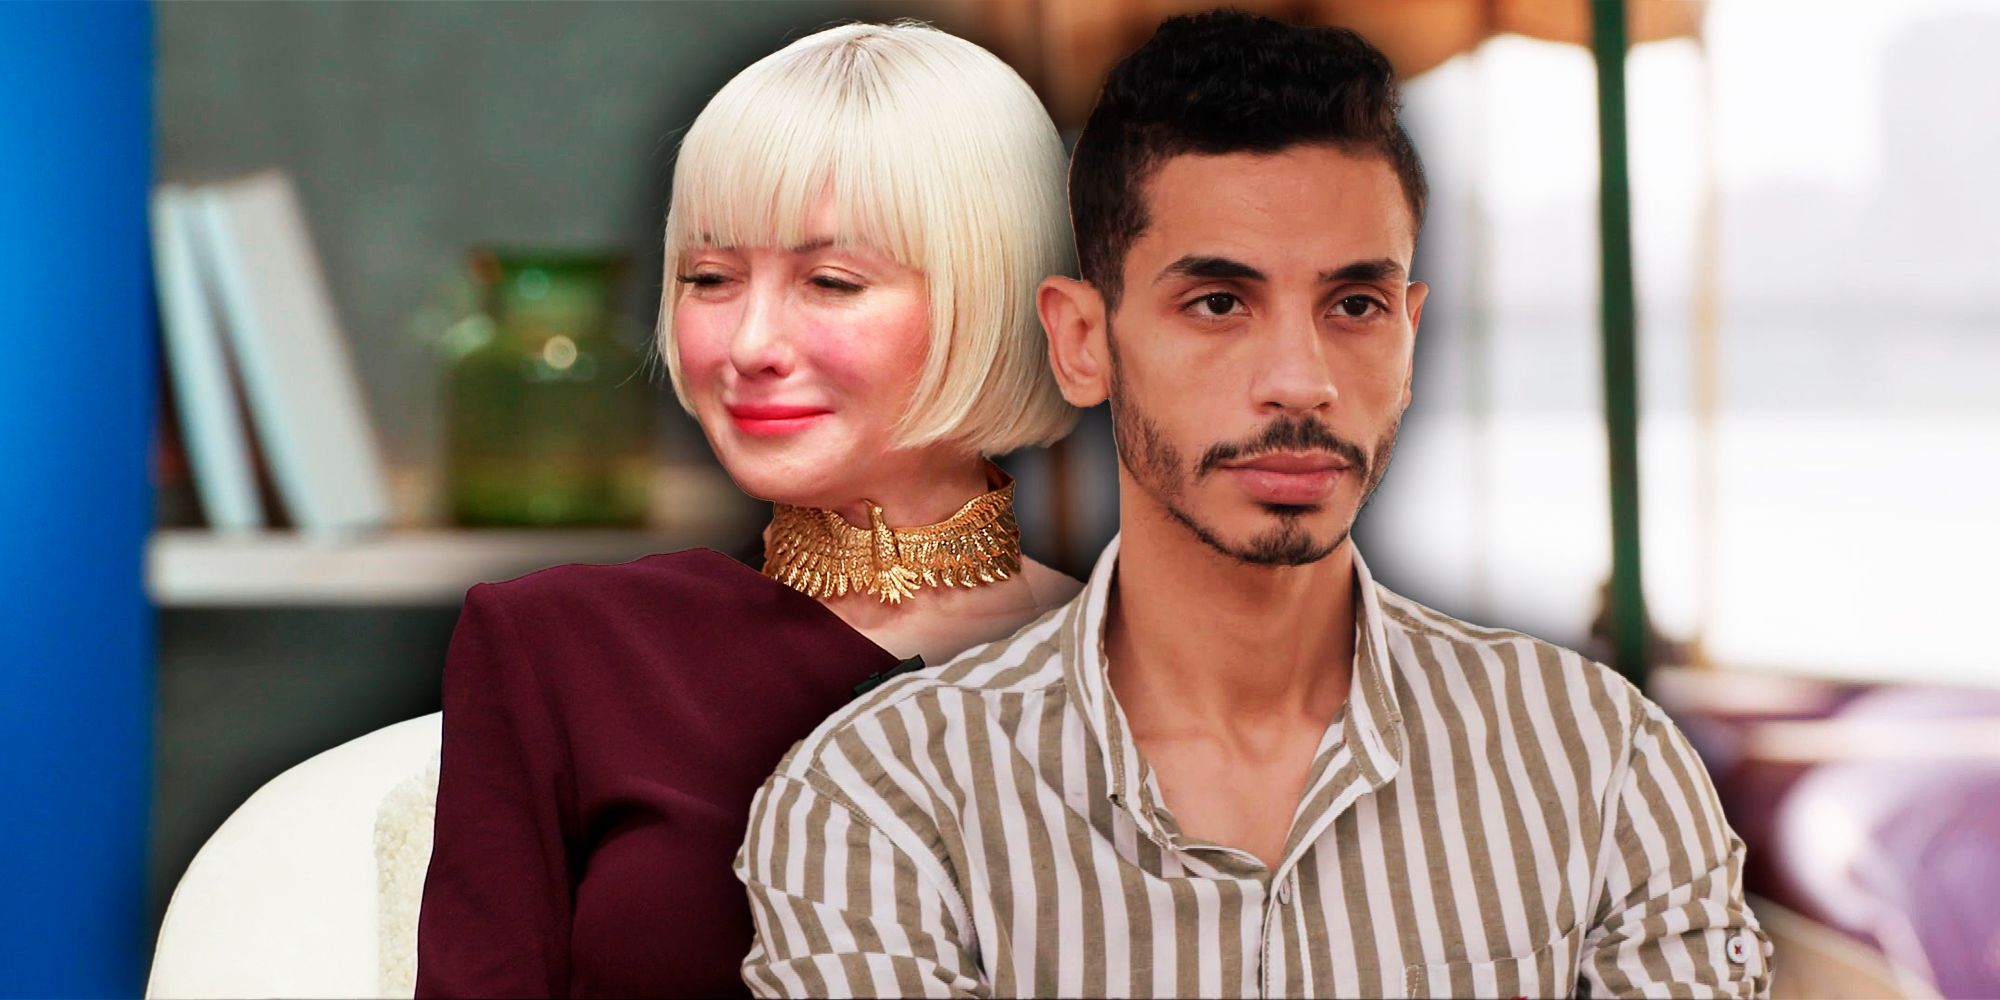  montage of mahmoud and nicole 90 day fiance her smling him looking serious